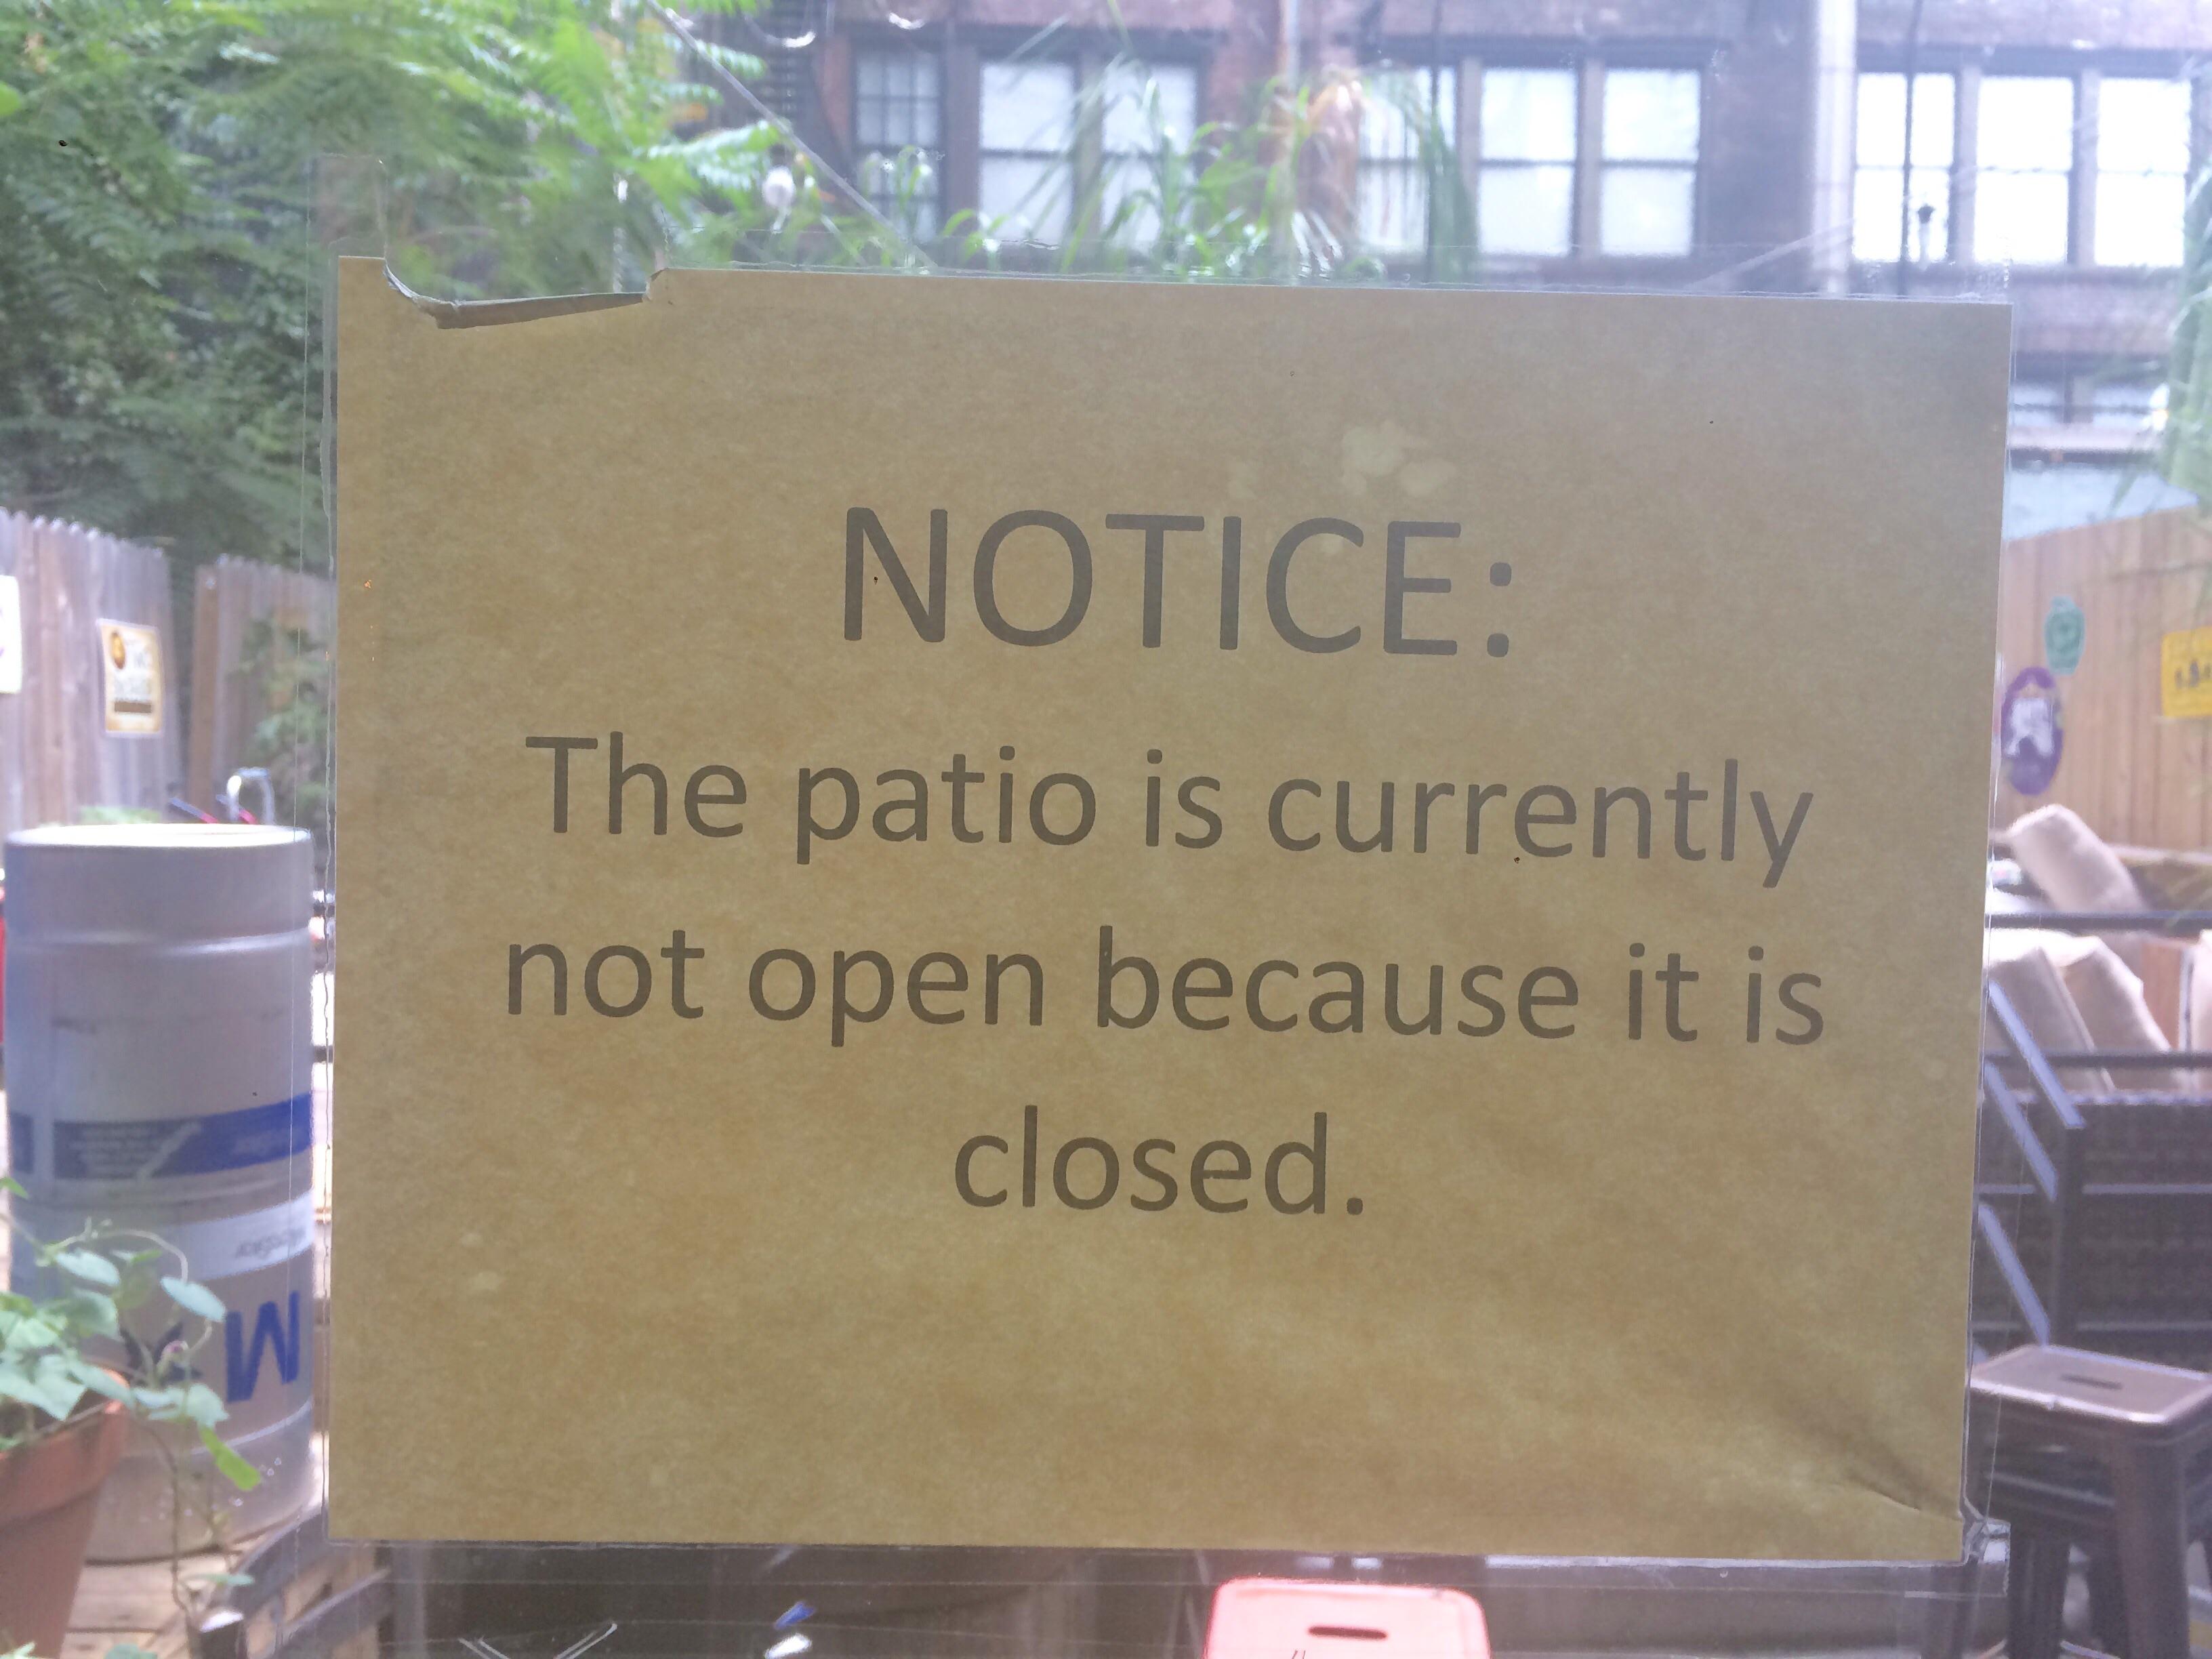 patio is closed today because - Notice The patio is currently not open because it is closed.